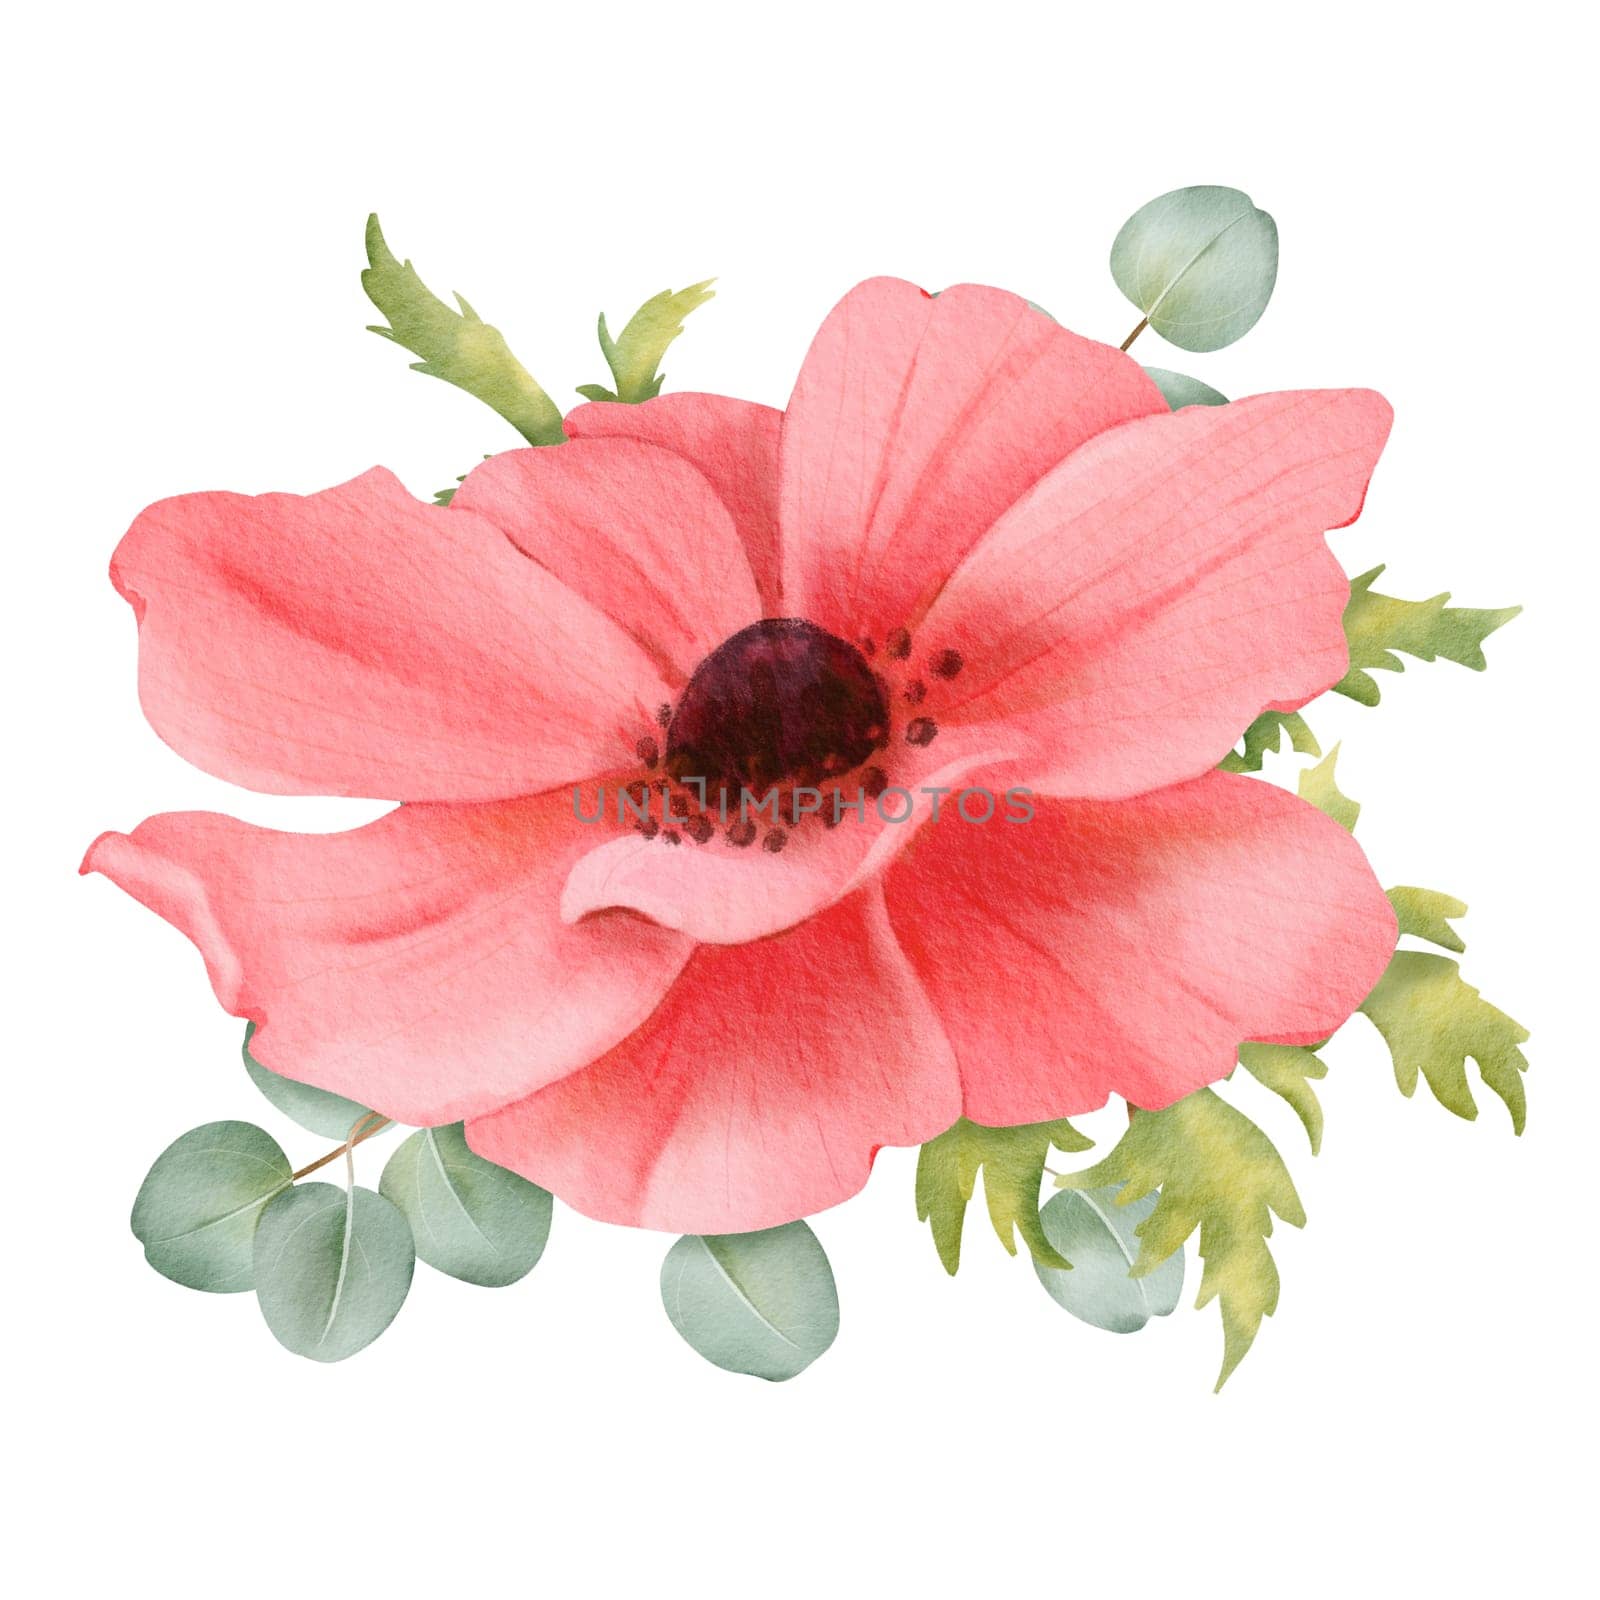 A watercolor floral composition featuring pink anemones, fresh greenery, and eucalyptus leaves. isolated object for use in design projects, wedding invitations, greeting cards or digital illustrations.